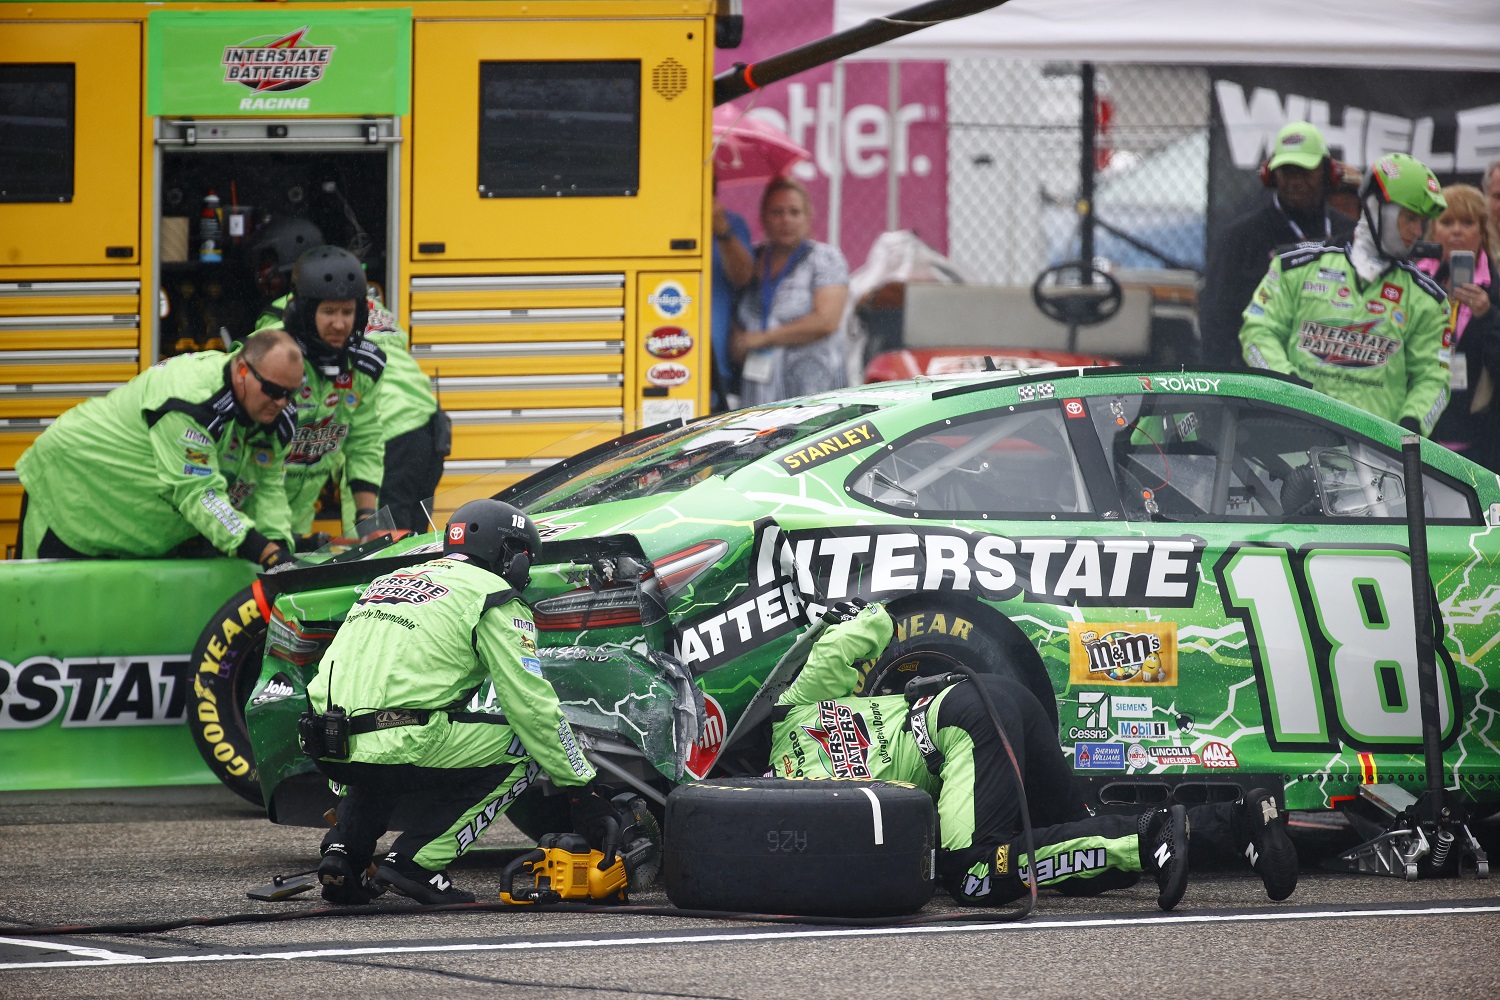 The Joe Gibbs Racing pit crew for Kyle Busch work on the NASCAR star's No. 18 Toyota Camry following an early wreck in the Foxwoods Resort Casino 301 at New Hampshire Motor Speedway. | Jared C. Tilton/Getty Images